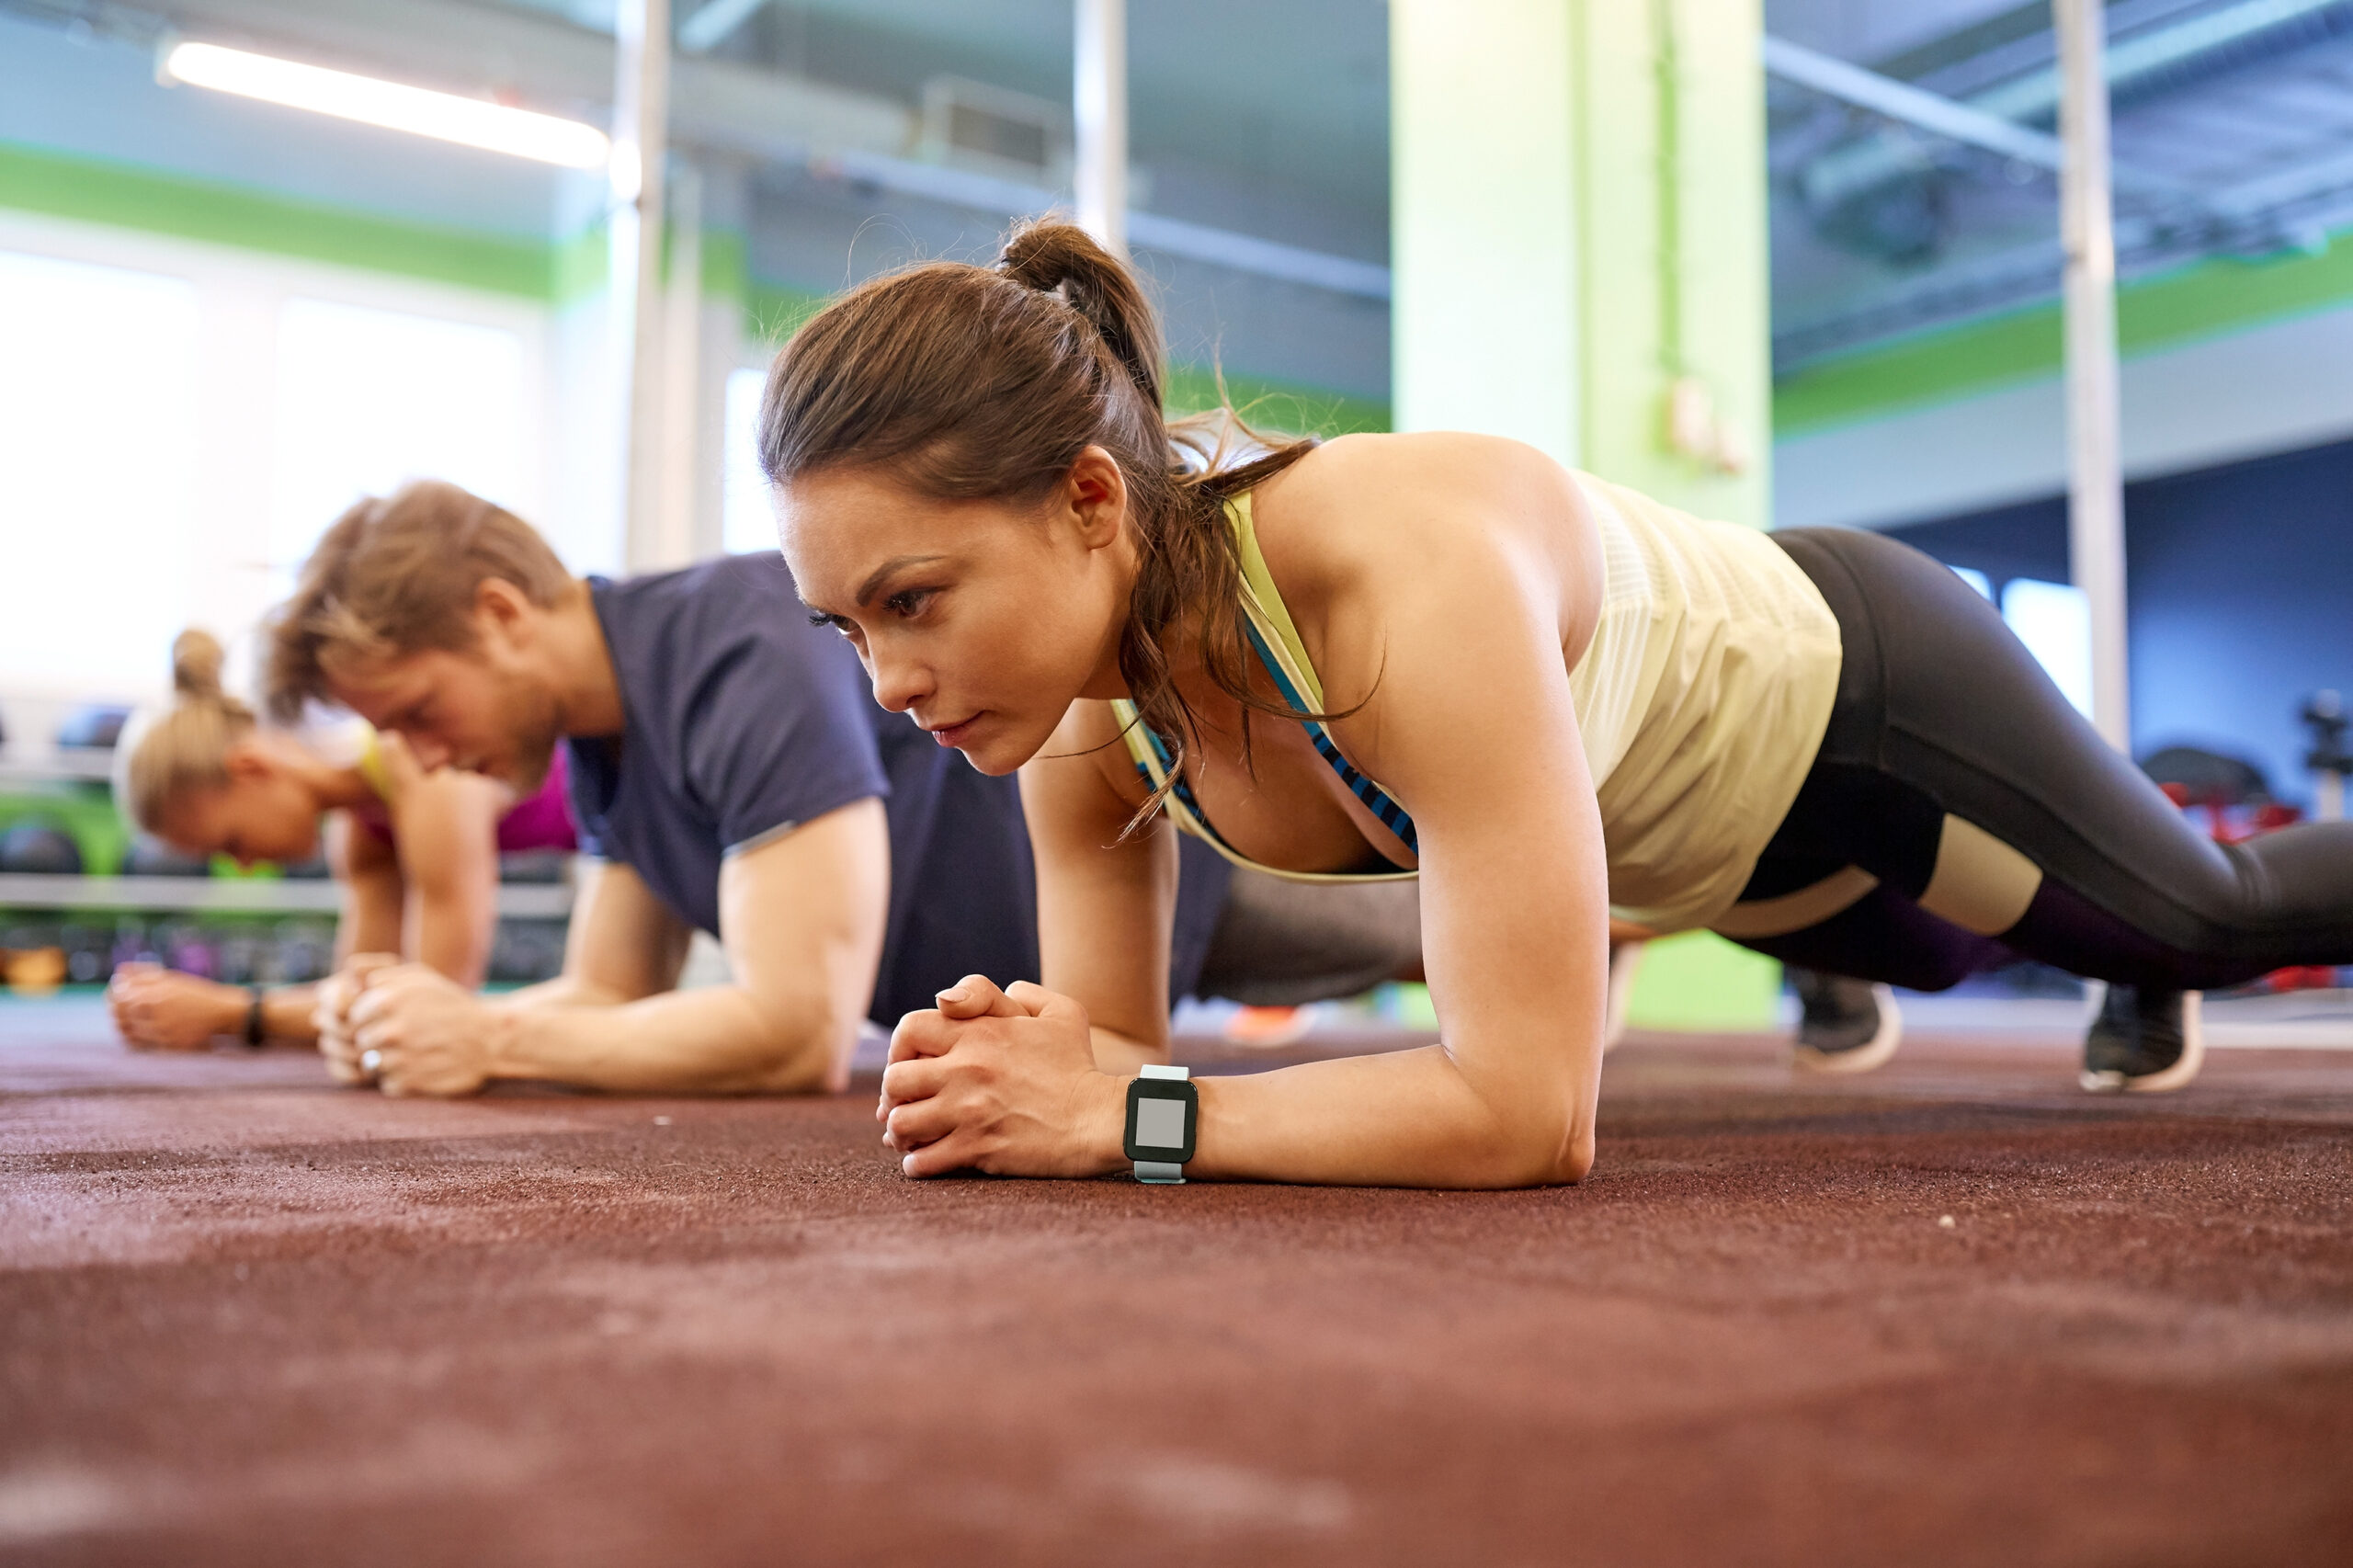 Fitness, sport, exercising and people concept - woman with heart-rate tracker at group training doing plank exercise in gym